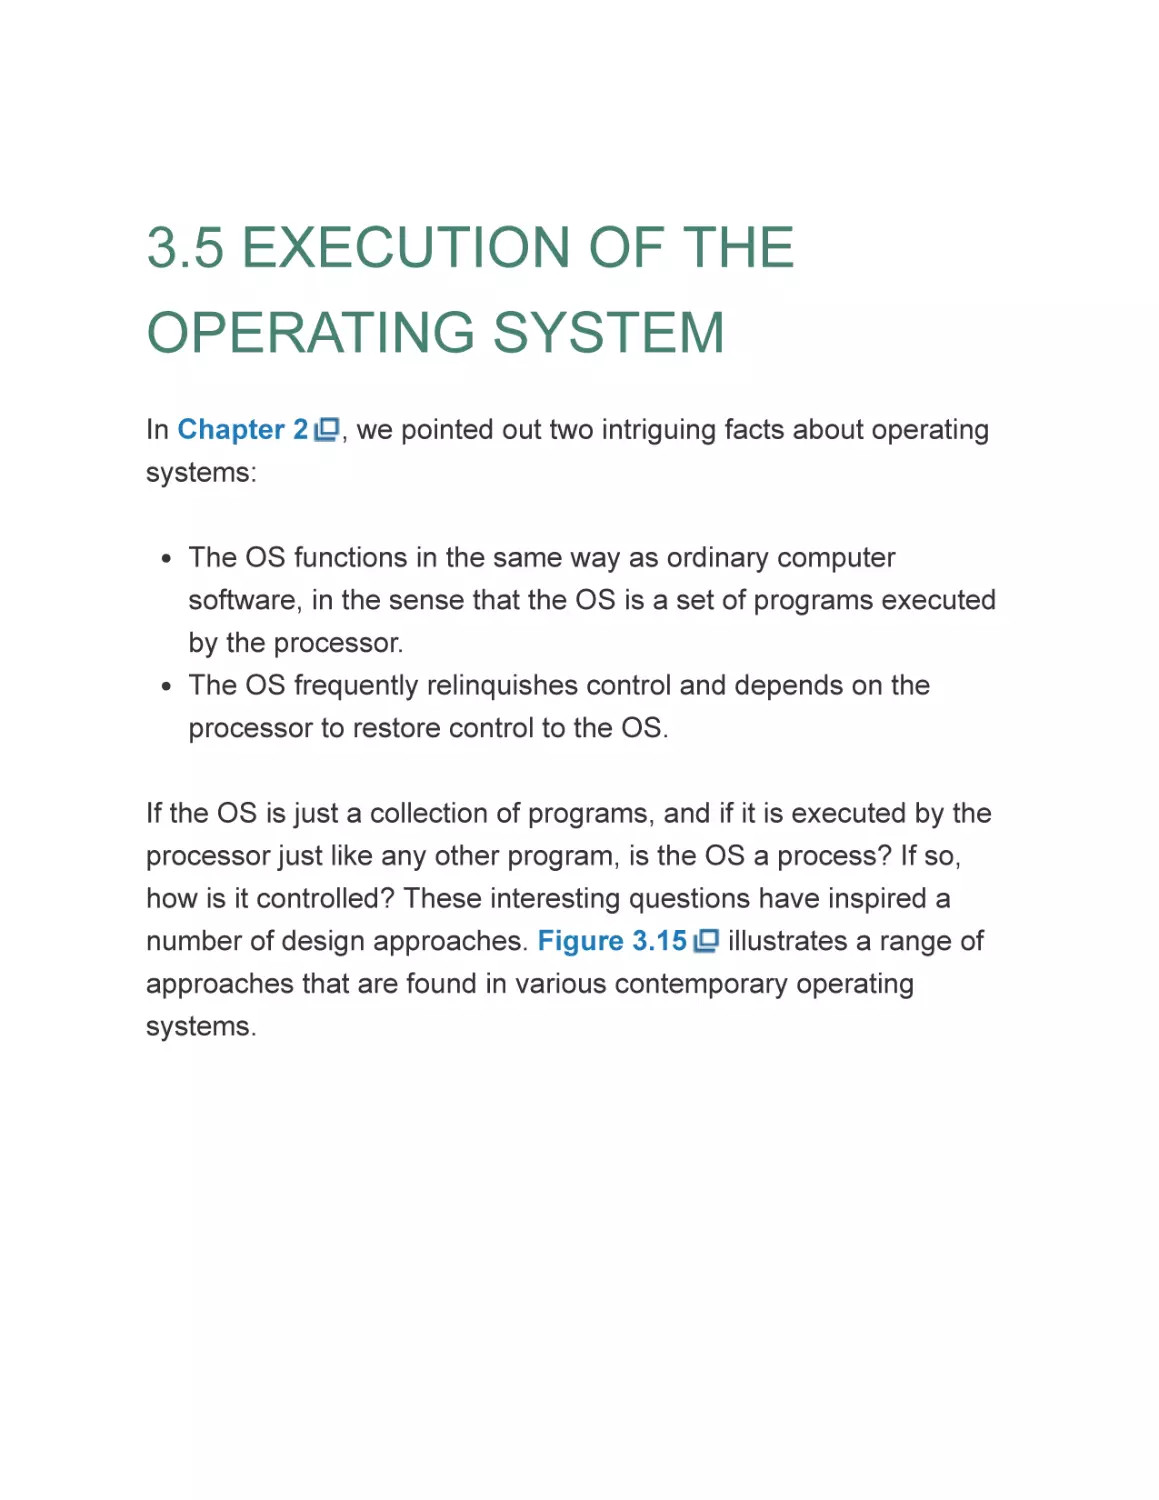 3.5 EXECUTION OF THE OPERATING SYSTEM